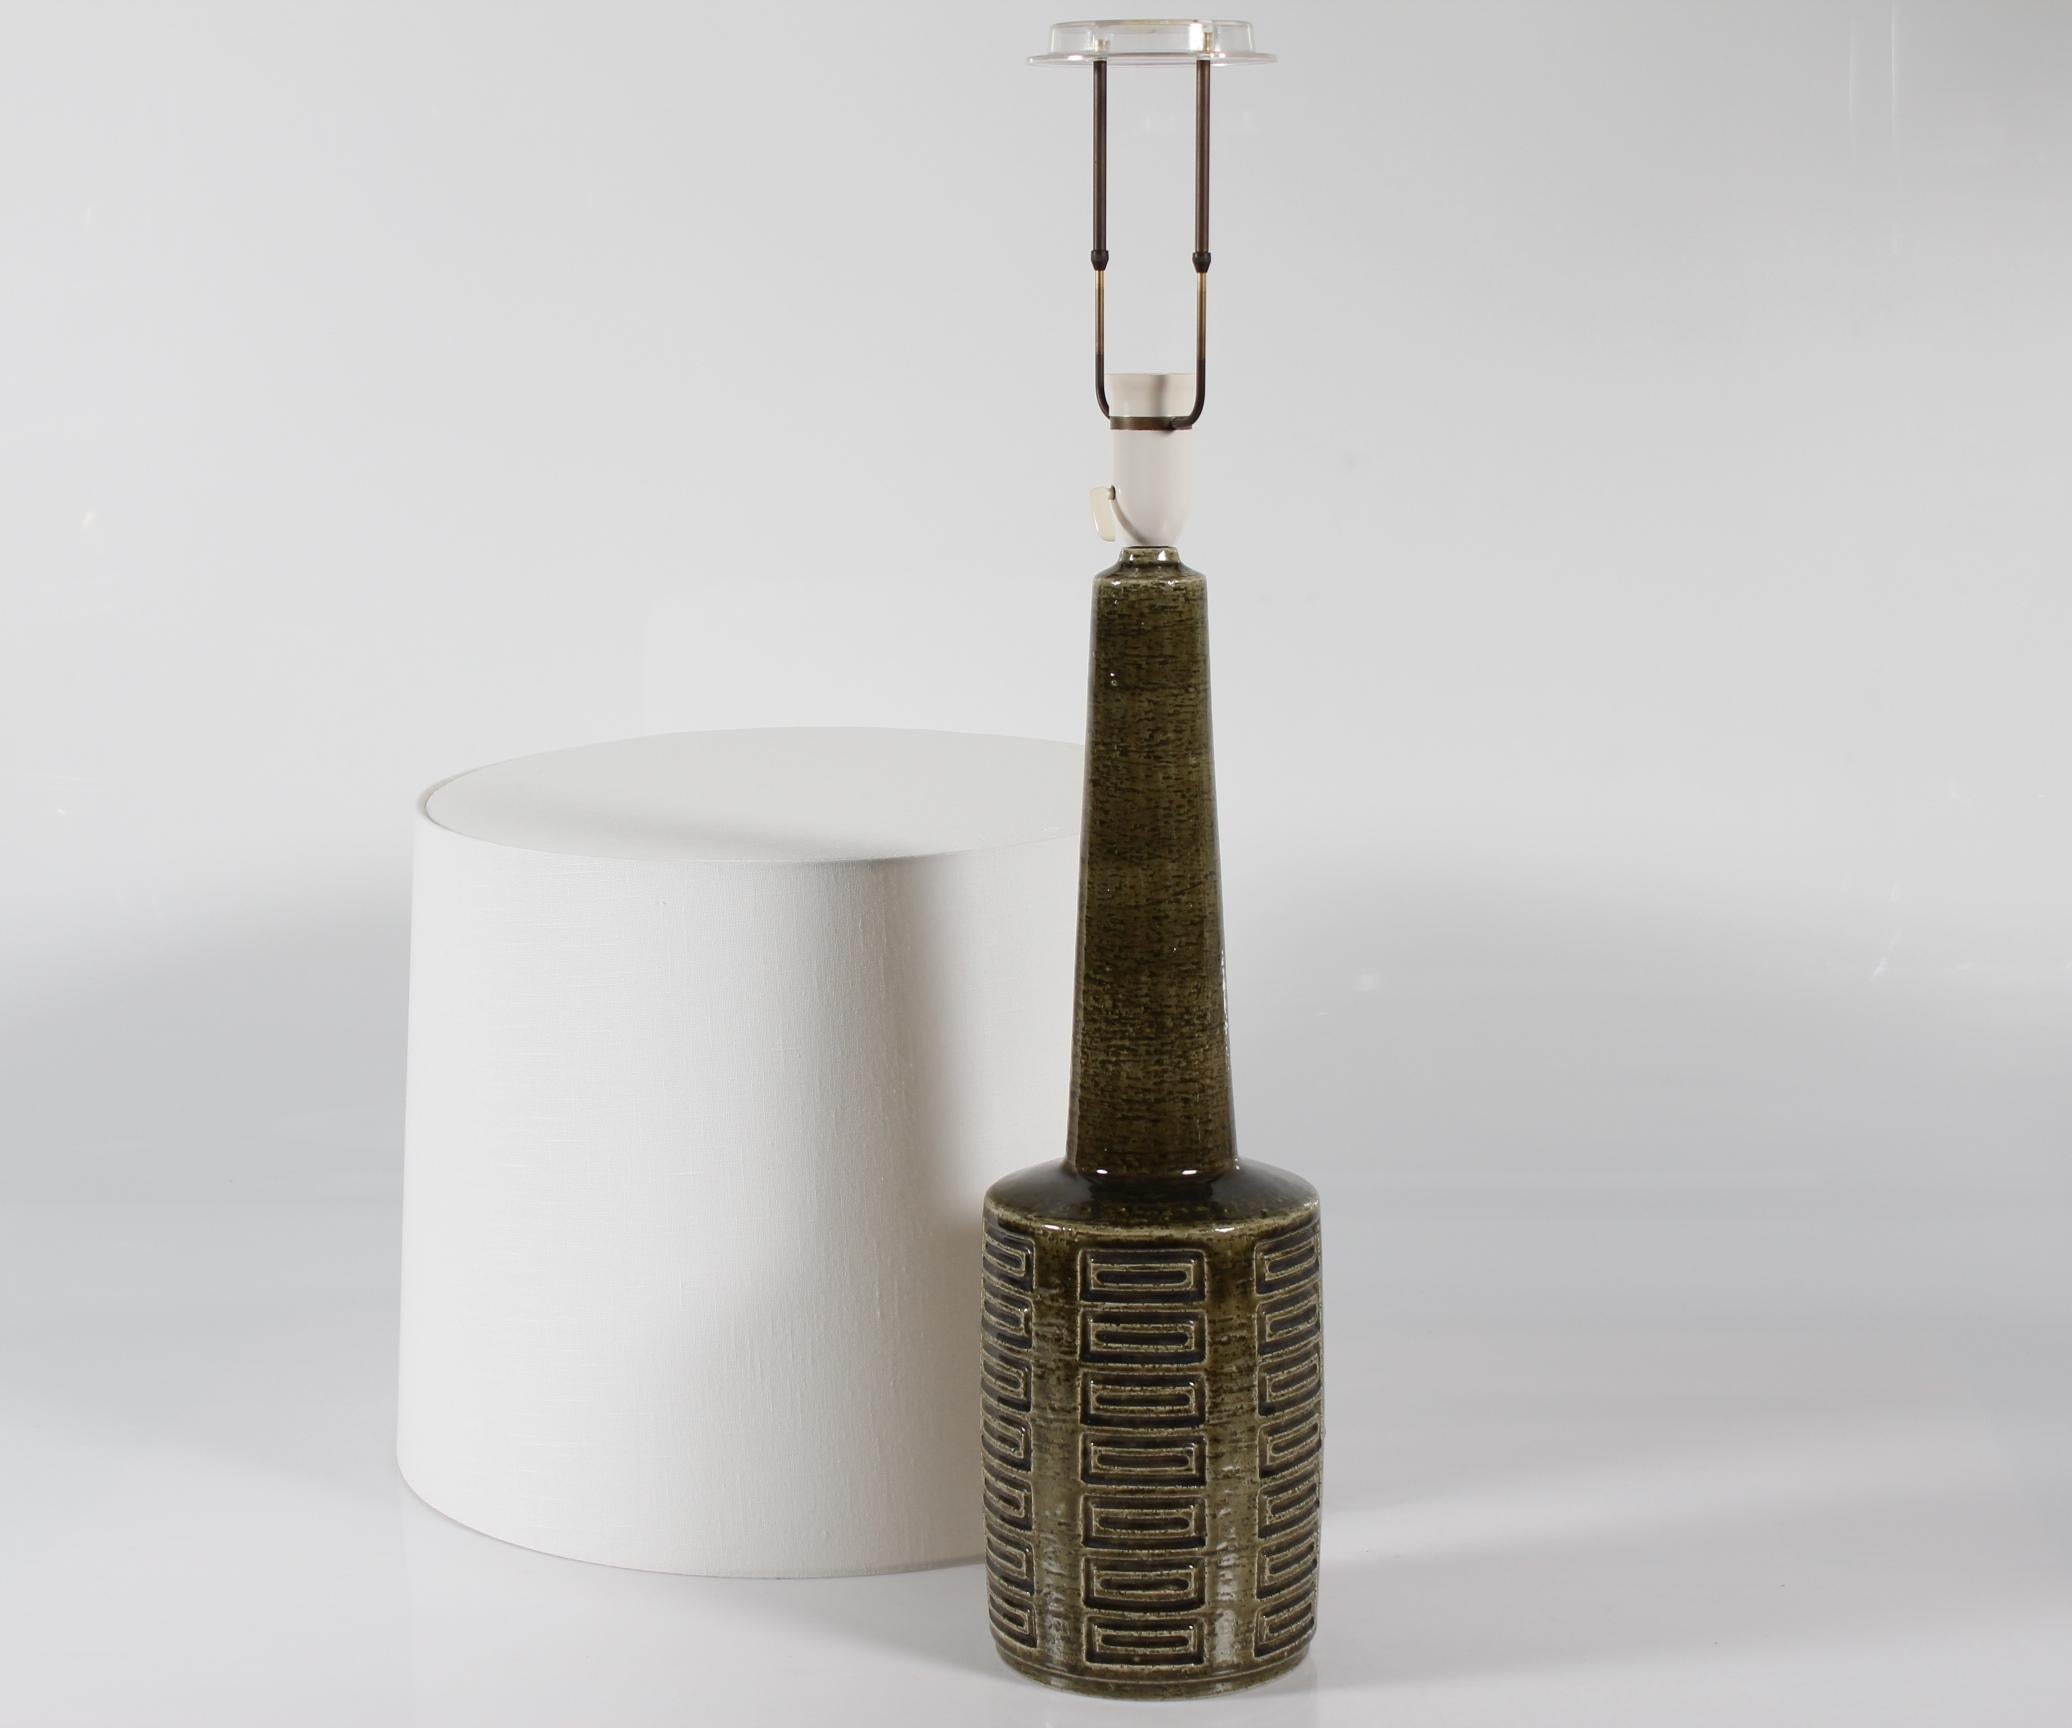 Huge Mid-century Danish ceramic table lamp from Palshus with dark apple green glossy glaze.
The lamp is designed by Annelise og Per Linnemann-Schmidt and manufactured in their own studio 1960-1980.
The lamp foot is made with chamotte clay which